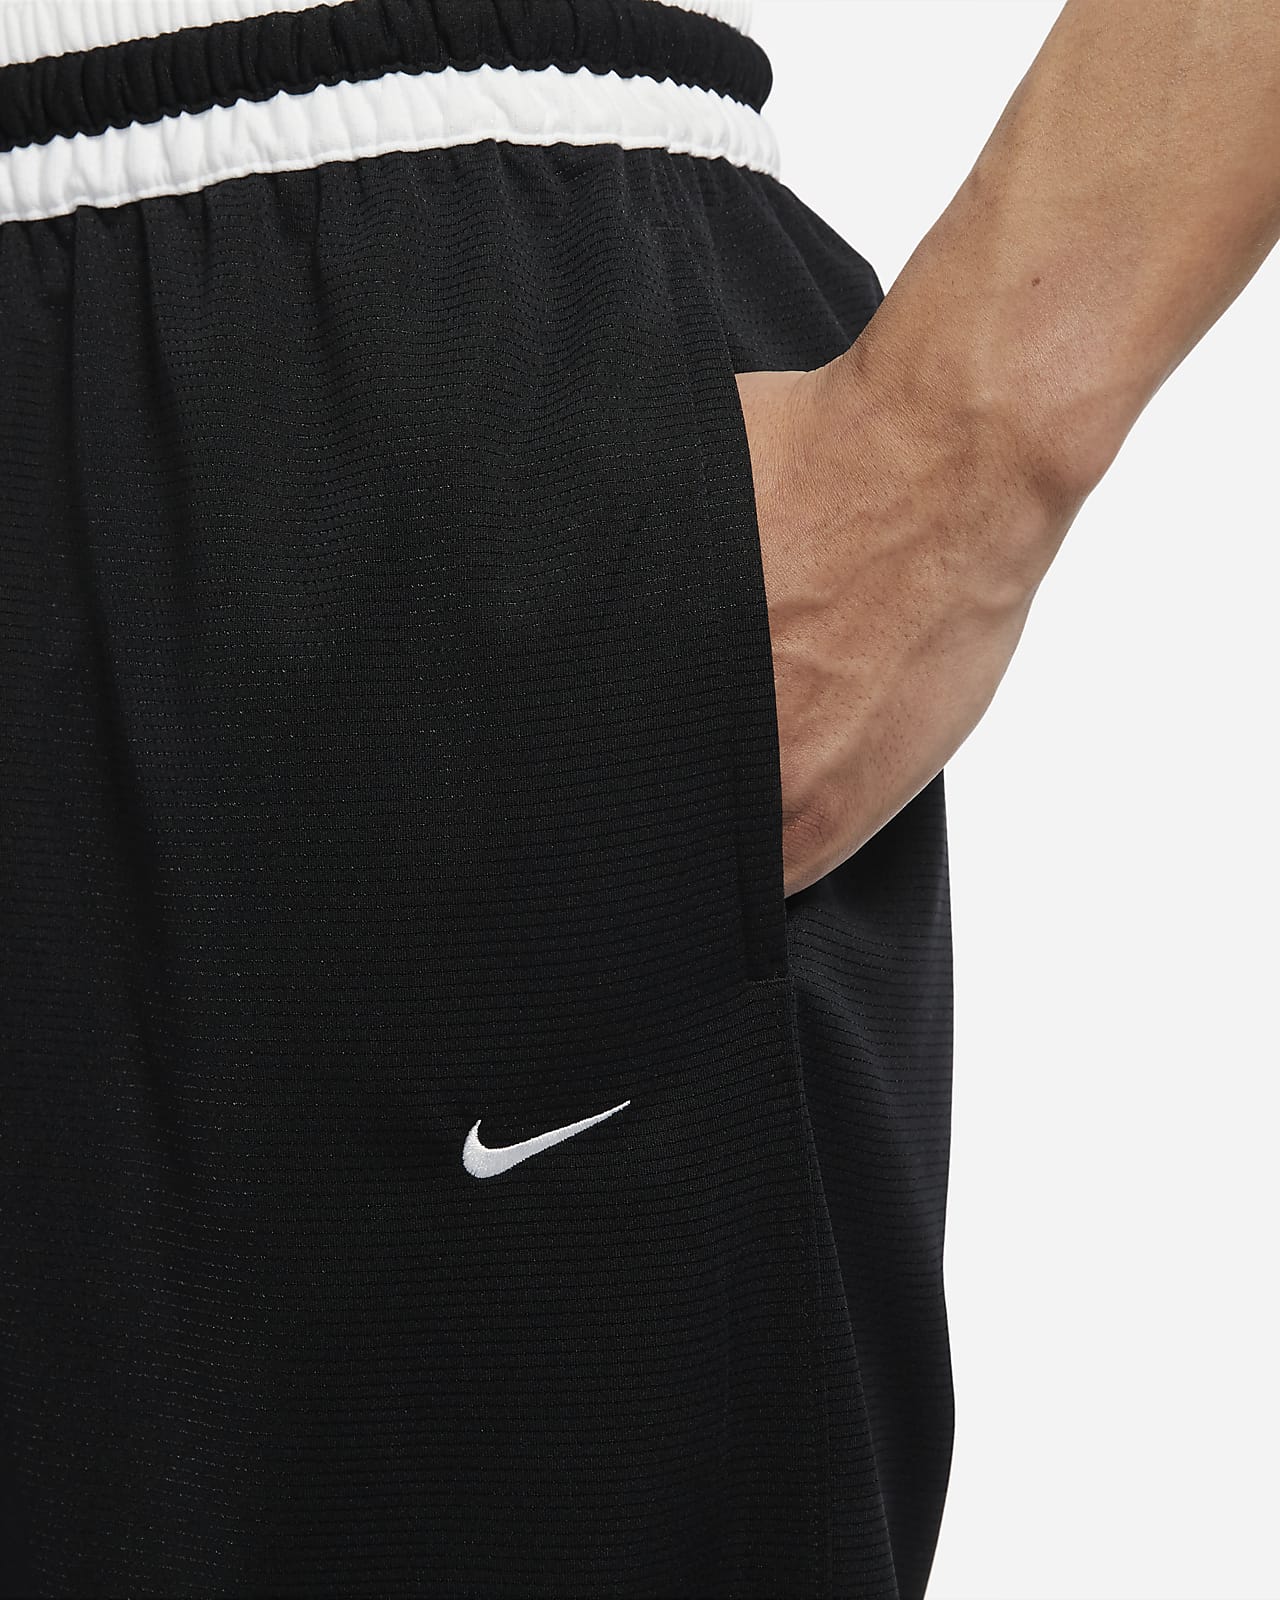 Nike Dri-FIT Icon, Men's Basketball Shorts, Athletic Shorts with Side  Pockets, Black/Black/White, Large (Pack of Two)